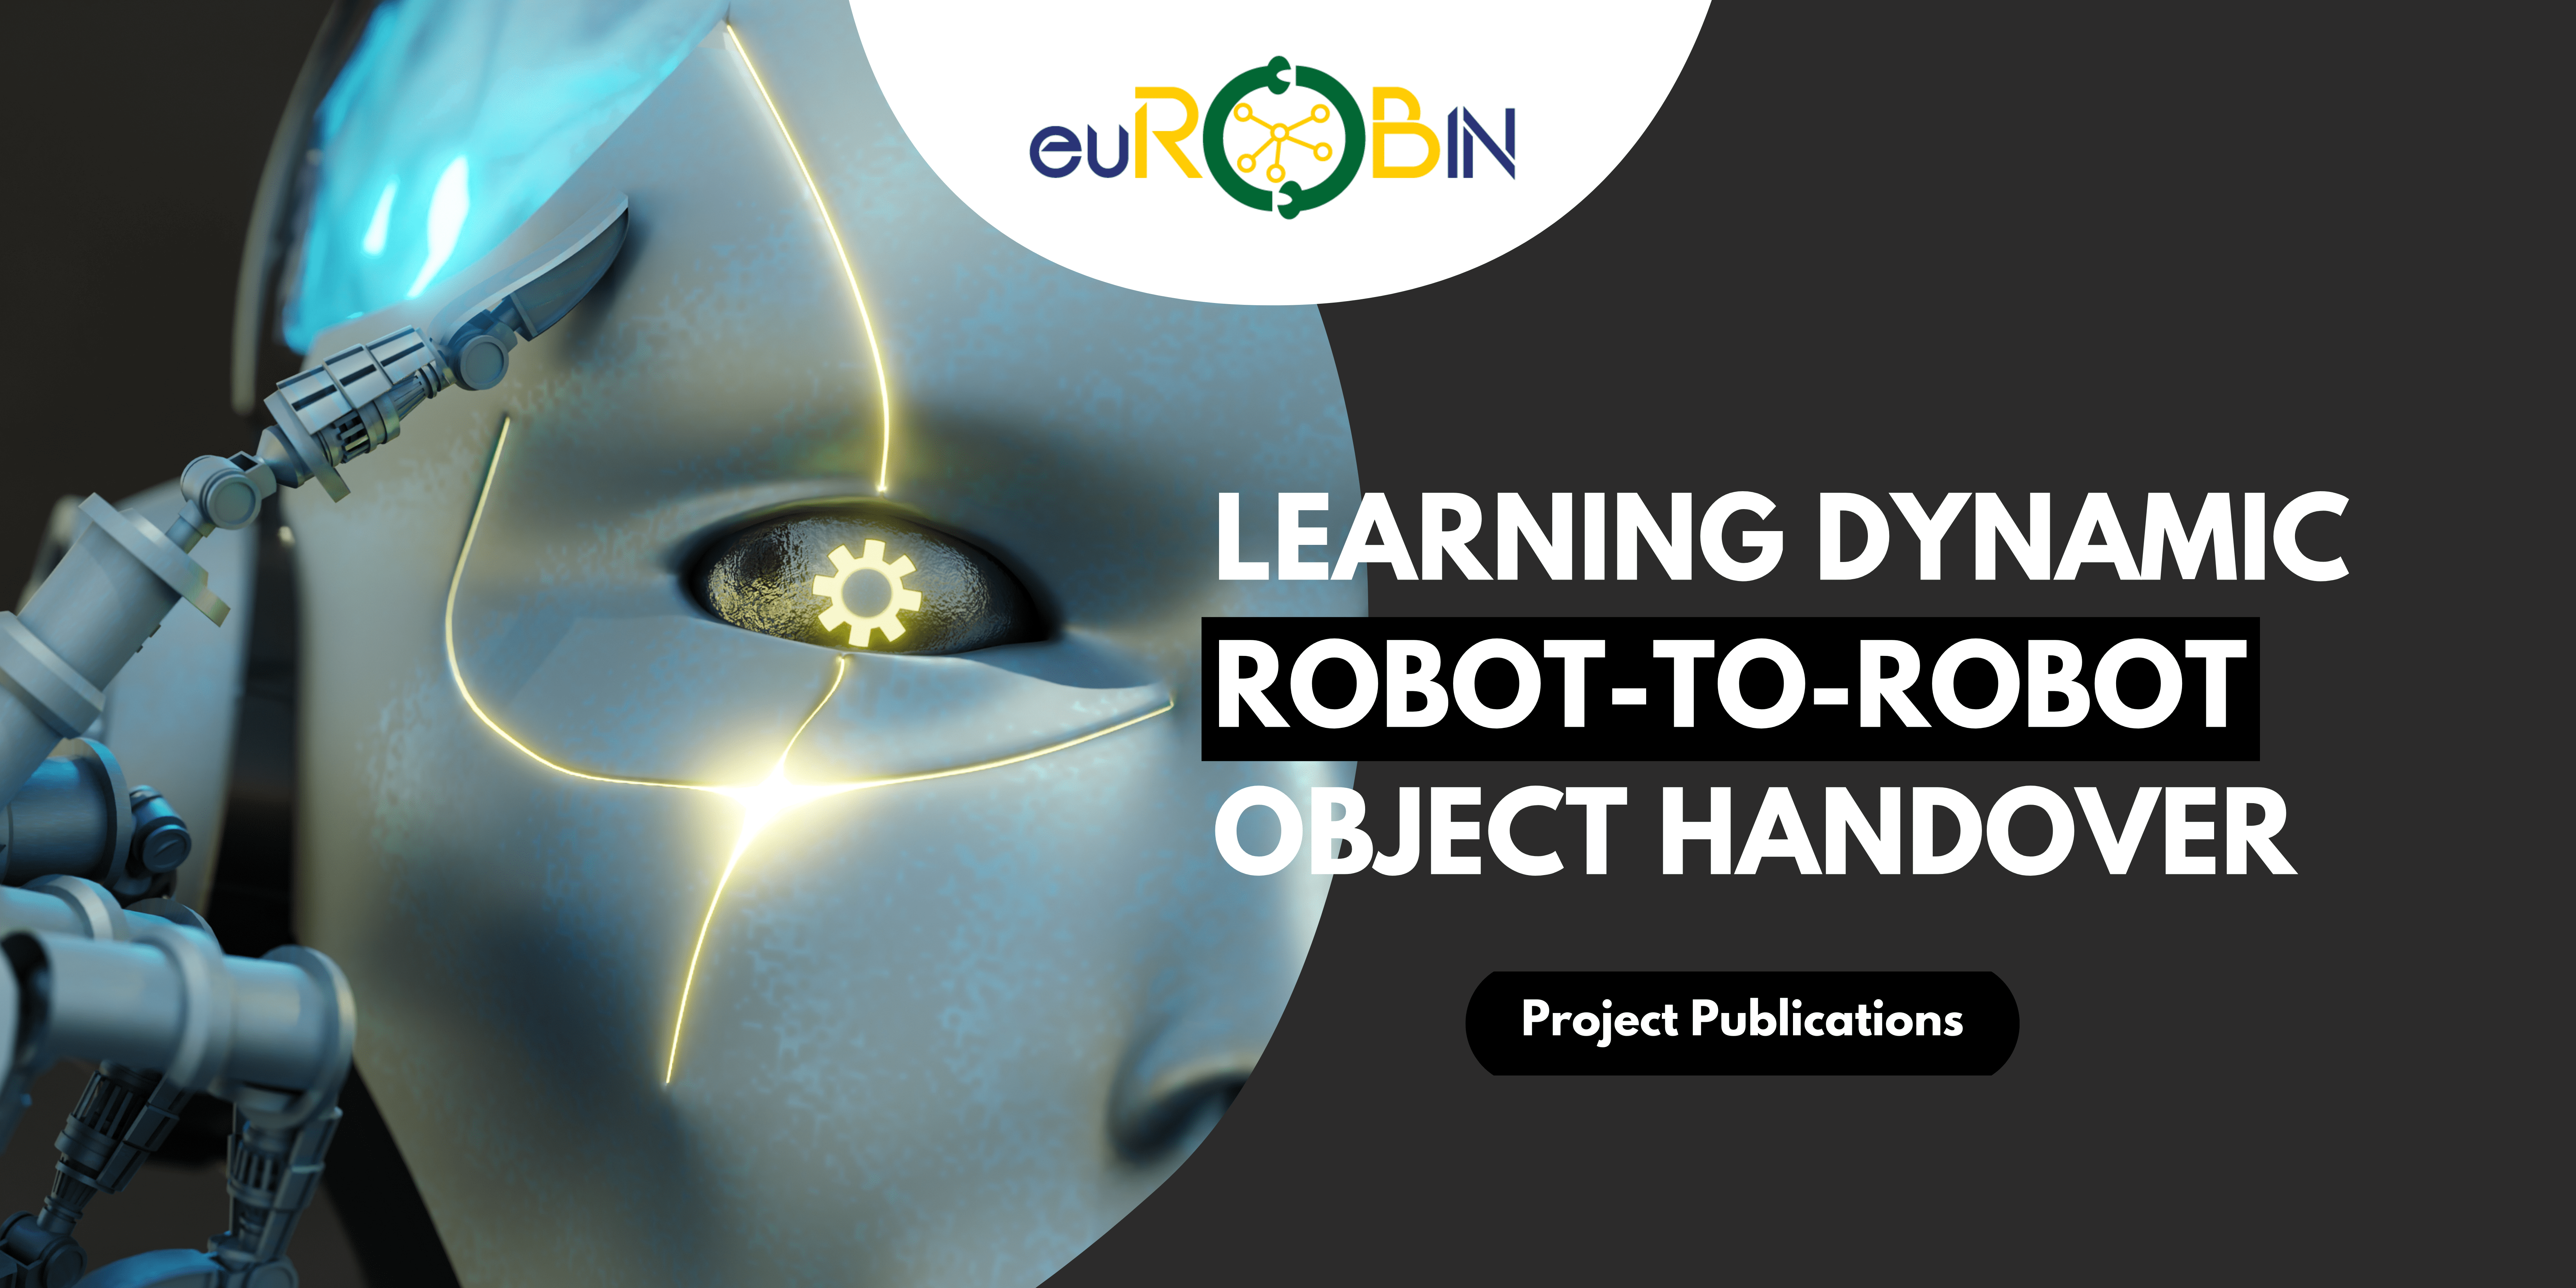 Project Publications | Learning Dynamic Robot-to-Robot Object Handover